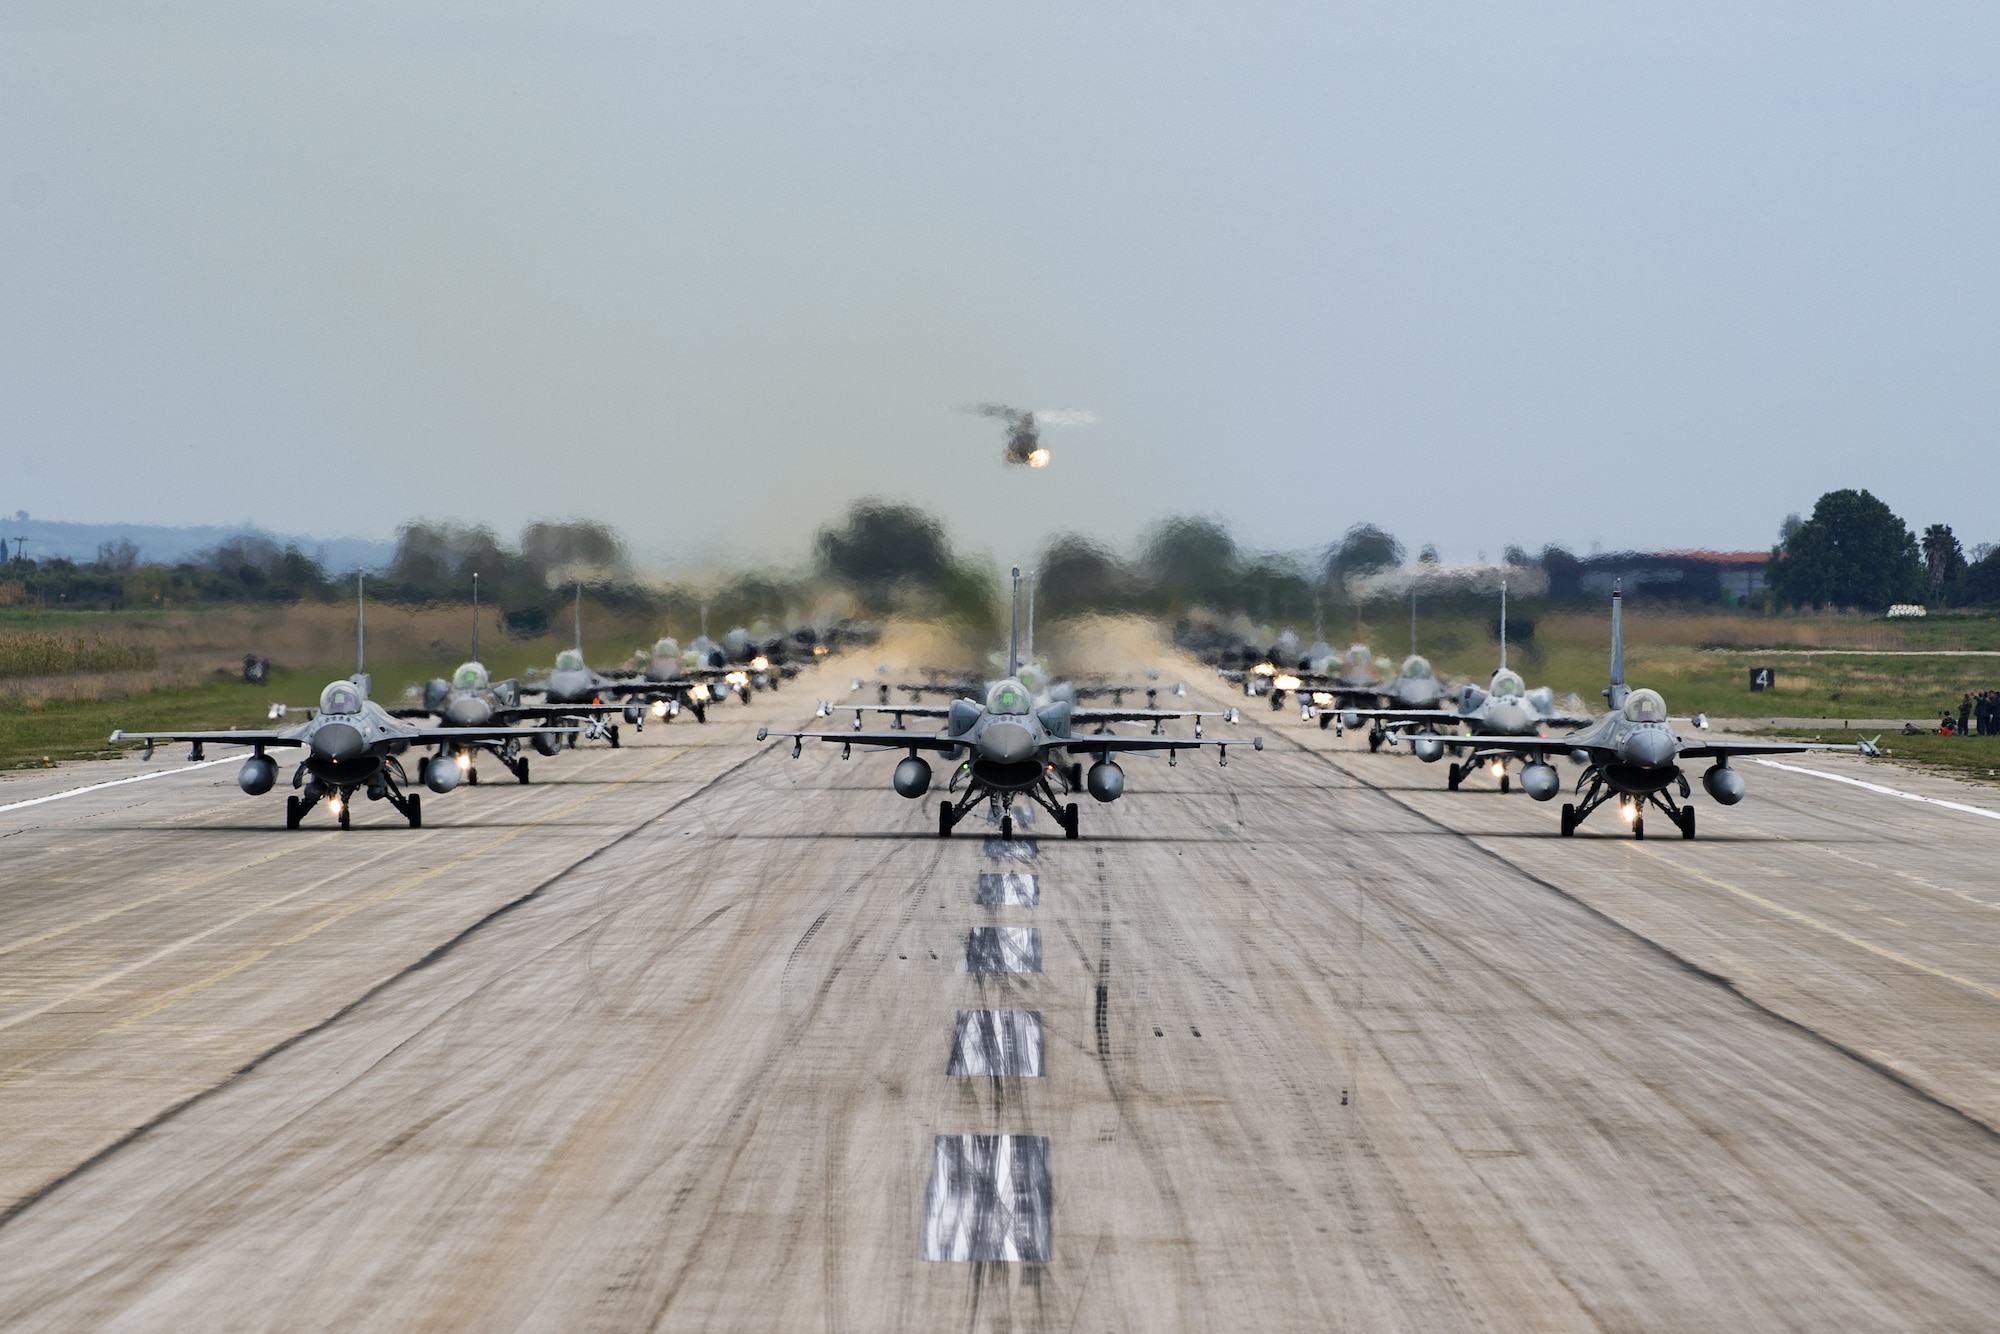 Aircraft from several countries participating in INIOCHOS 21 perform an elephant walk at Andravida Air Base, Greece, April 18, 2021. The 510th Fighter Squadron participated in INIOCHOS 21, a Hellenic air force-led, large force flying exercise. Participation in INIOCHOS 21 allowed U.S. Air Force pilots the opportunity to develop and improve air readiness and interoperability with allied and partner air forces. (U.S. Air Force photo by Airman 1st Class Thomas S. Keisler IV)